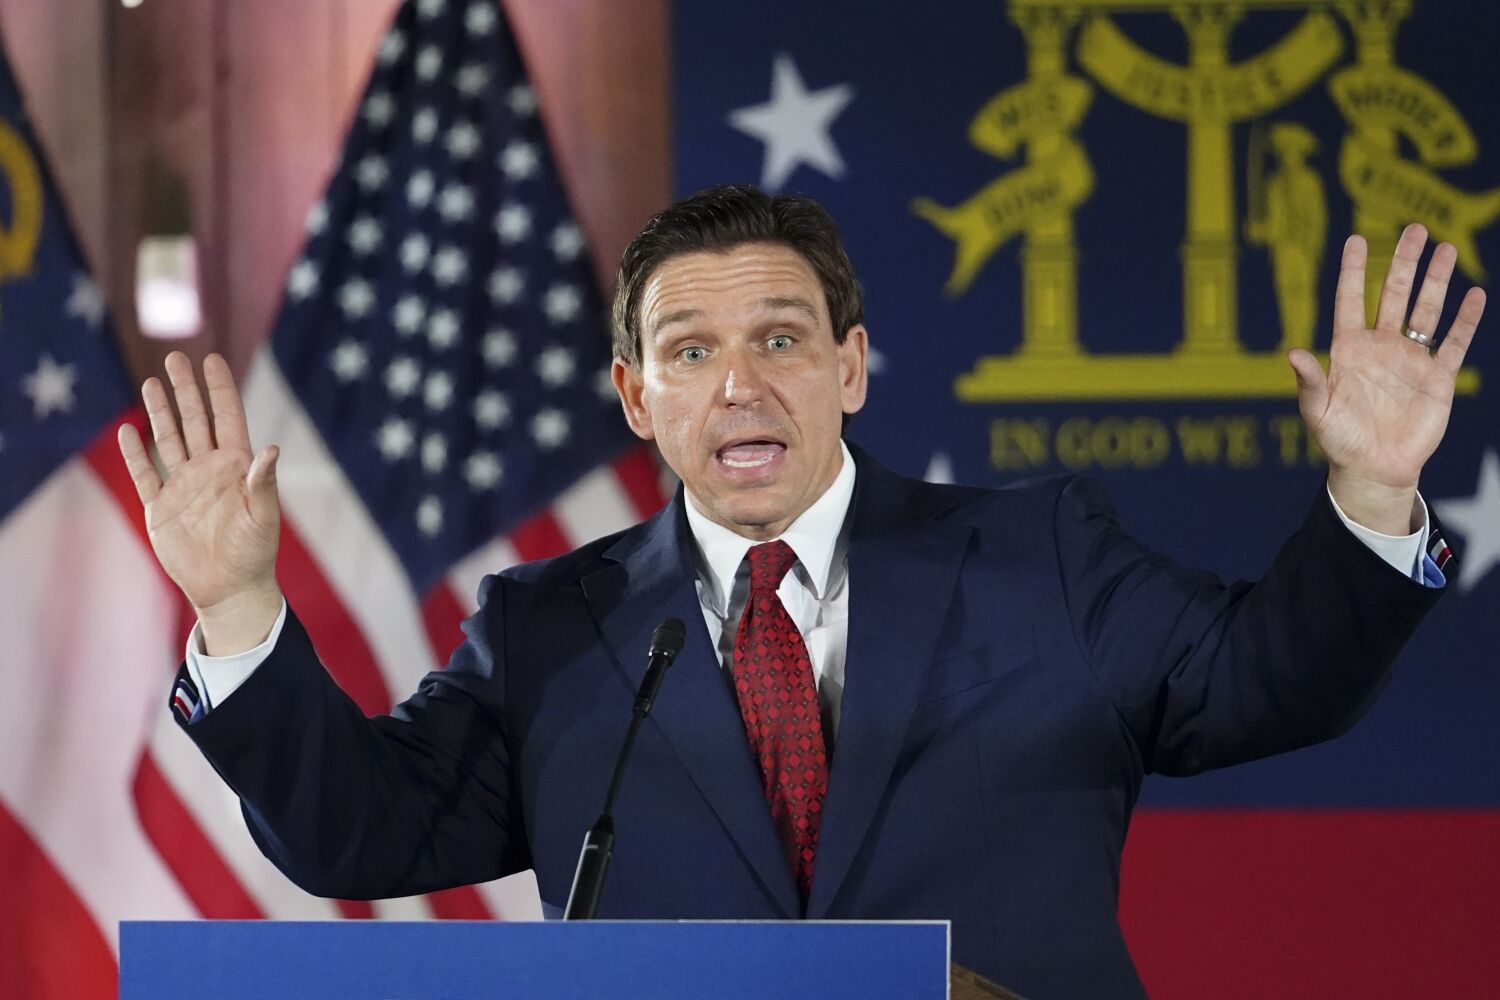 Goldberg: Ron DeSantis' response to Trump's indictment is a frightening new low even for him